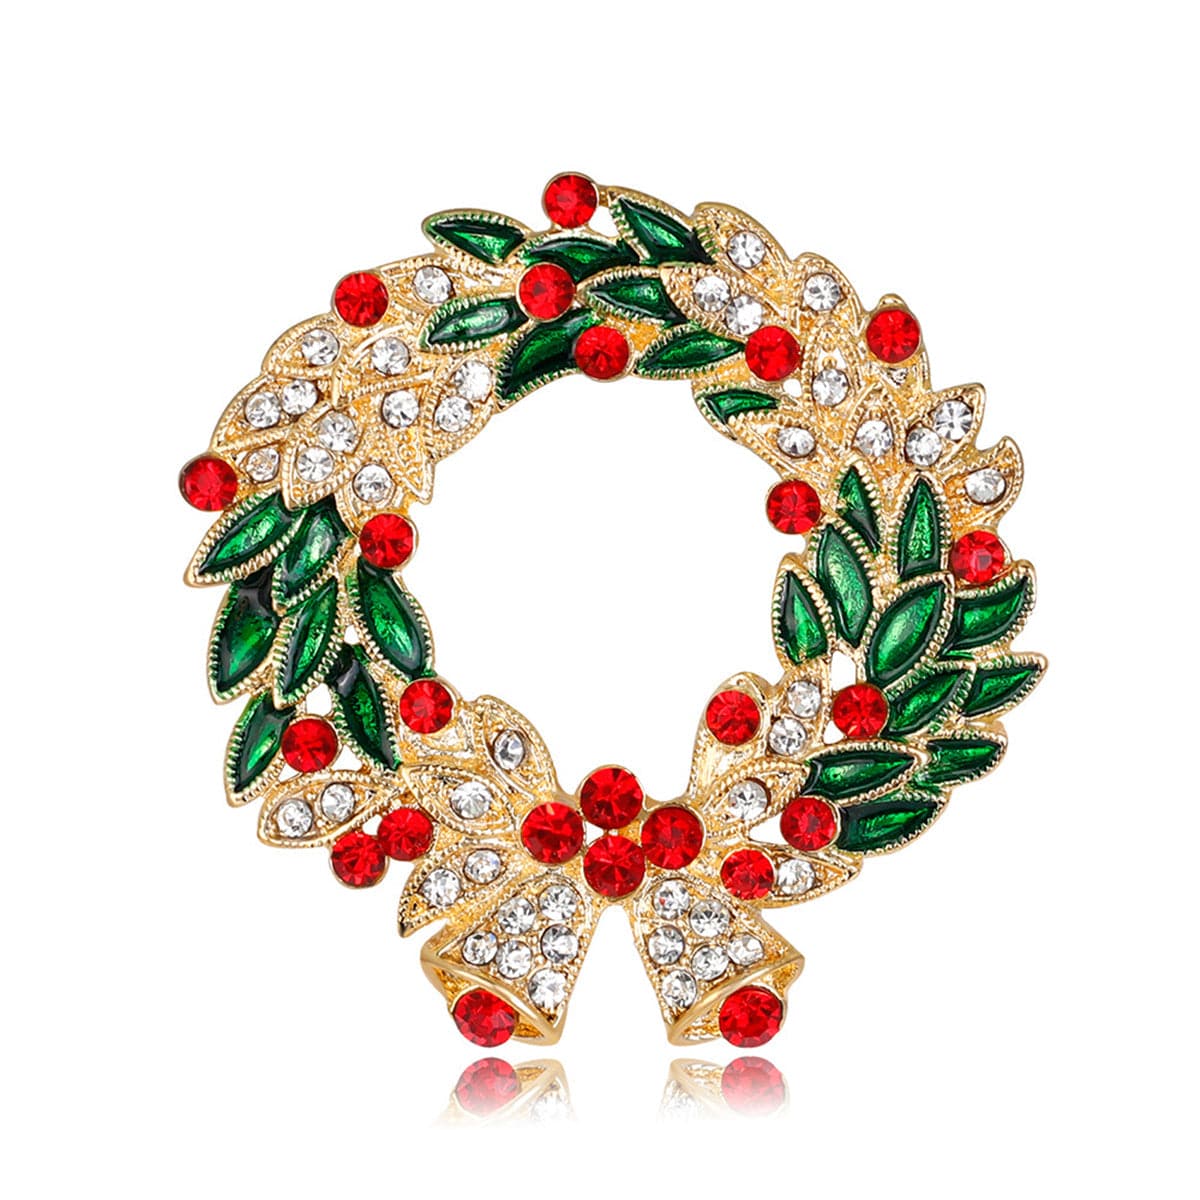 Cubic Zirconia & 18K Gold-Plated Wreath With Ribbon Brooch